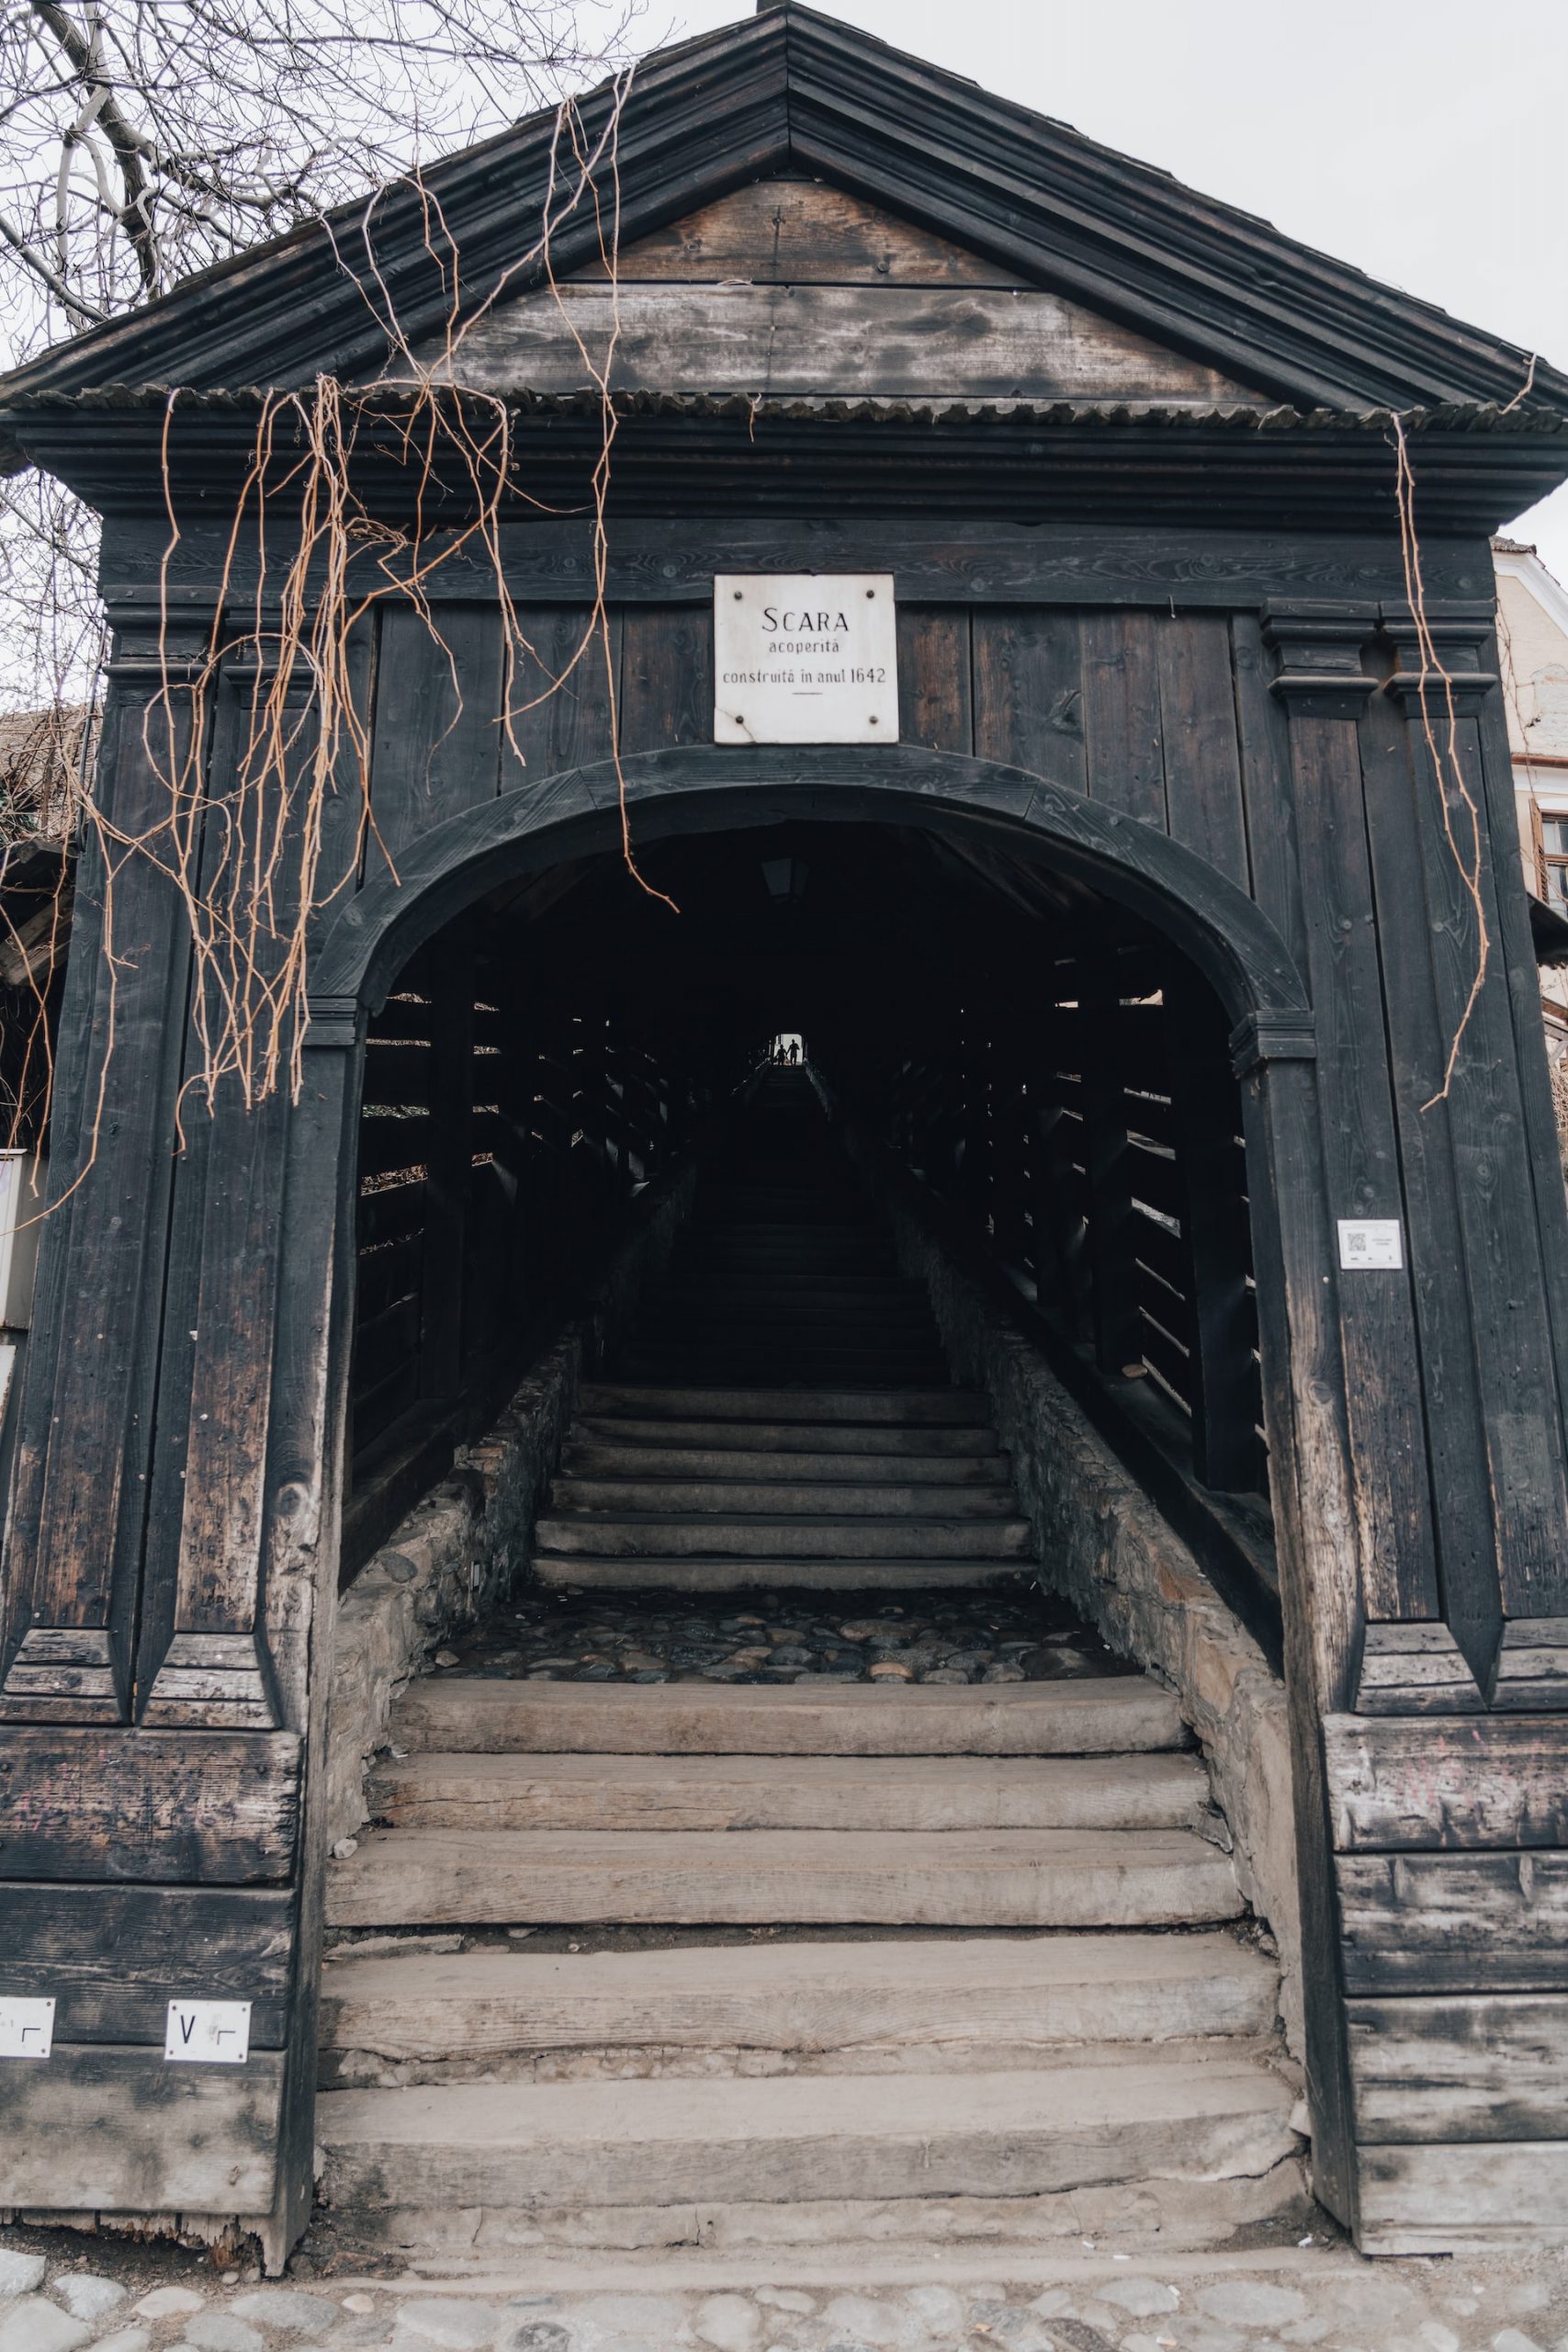 The Scholars’ Stairs in Sighisoara